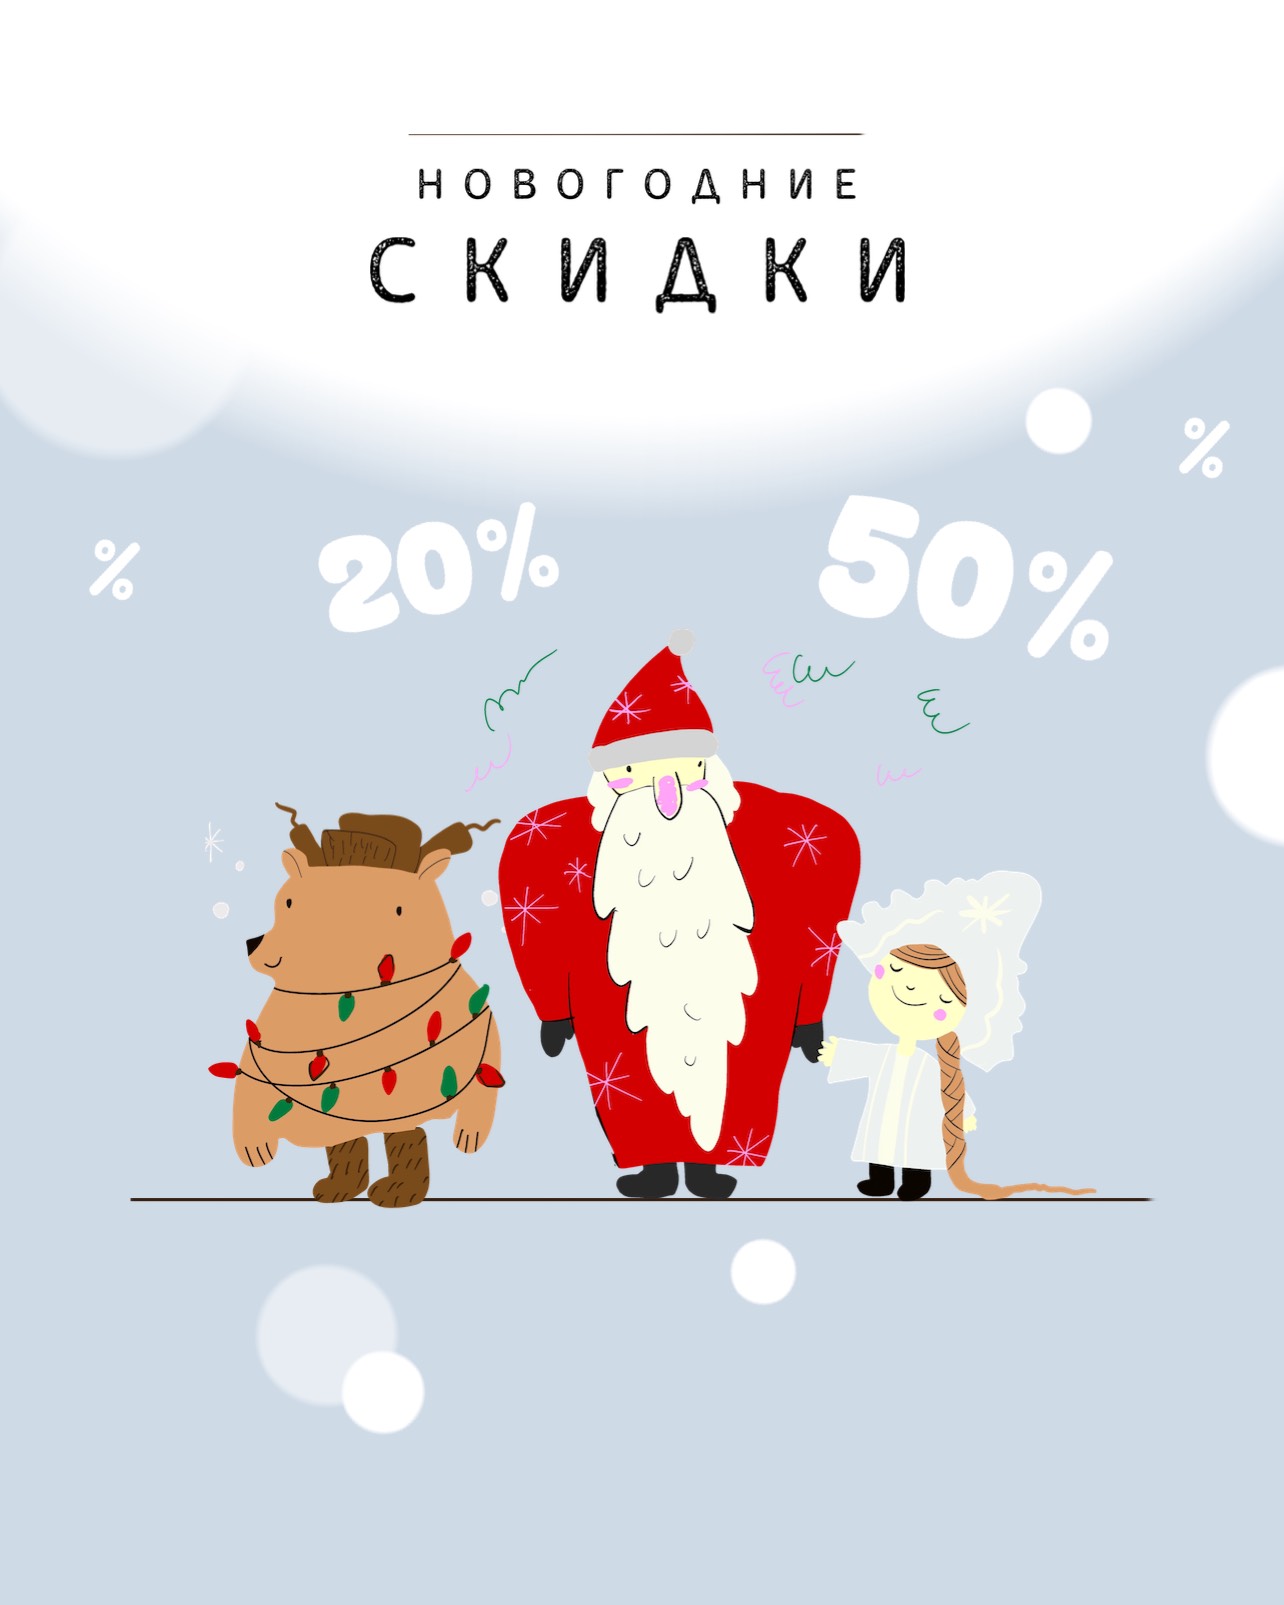 A Cartoon Of Santa Claus And Other Animals Template